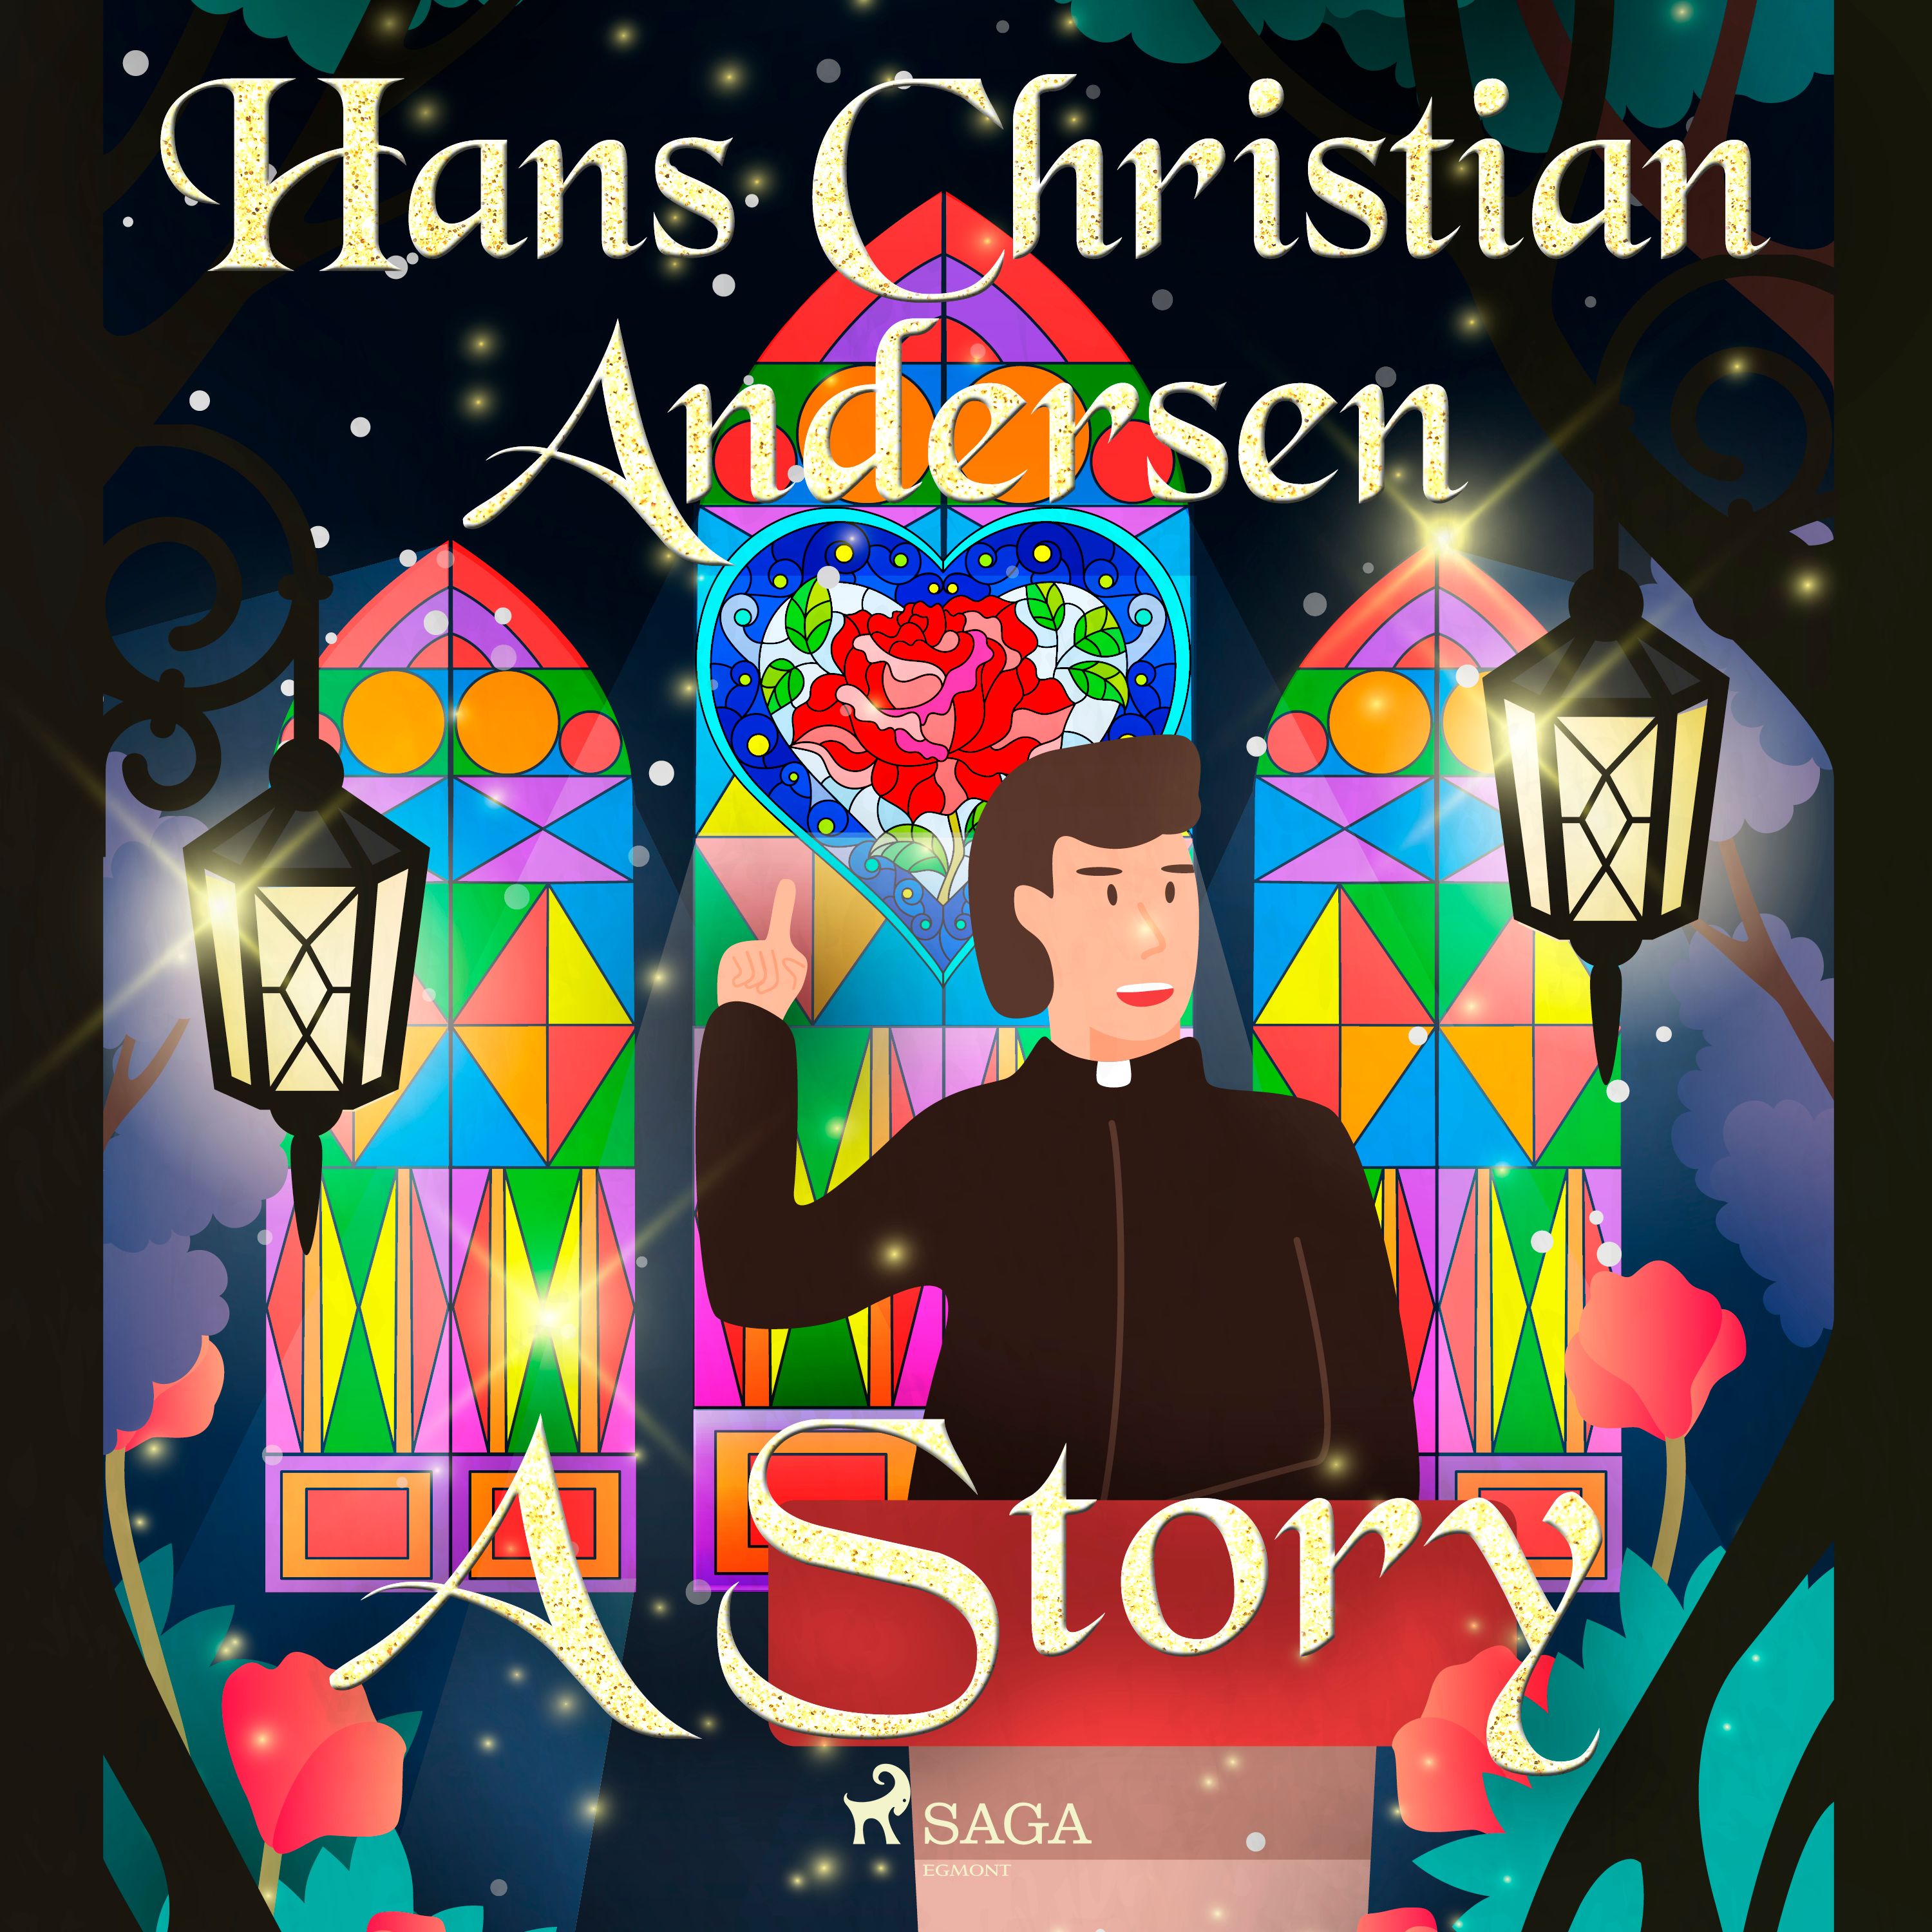 A Story, audiobook by Hans Christian Andersen